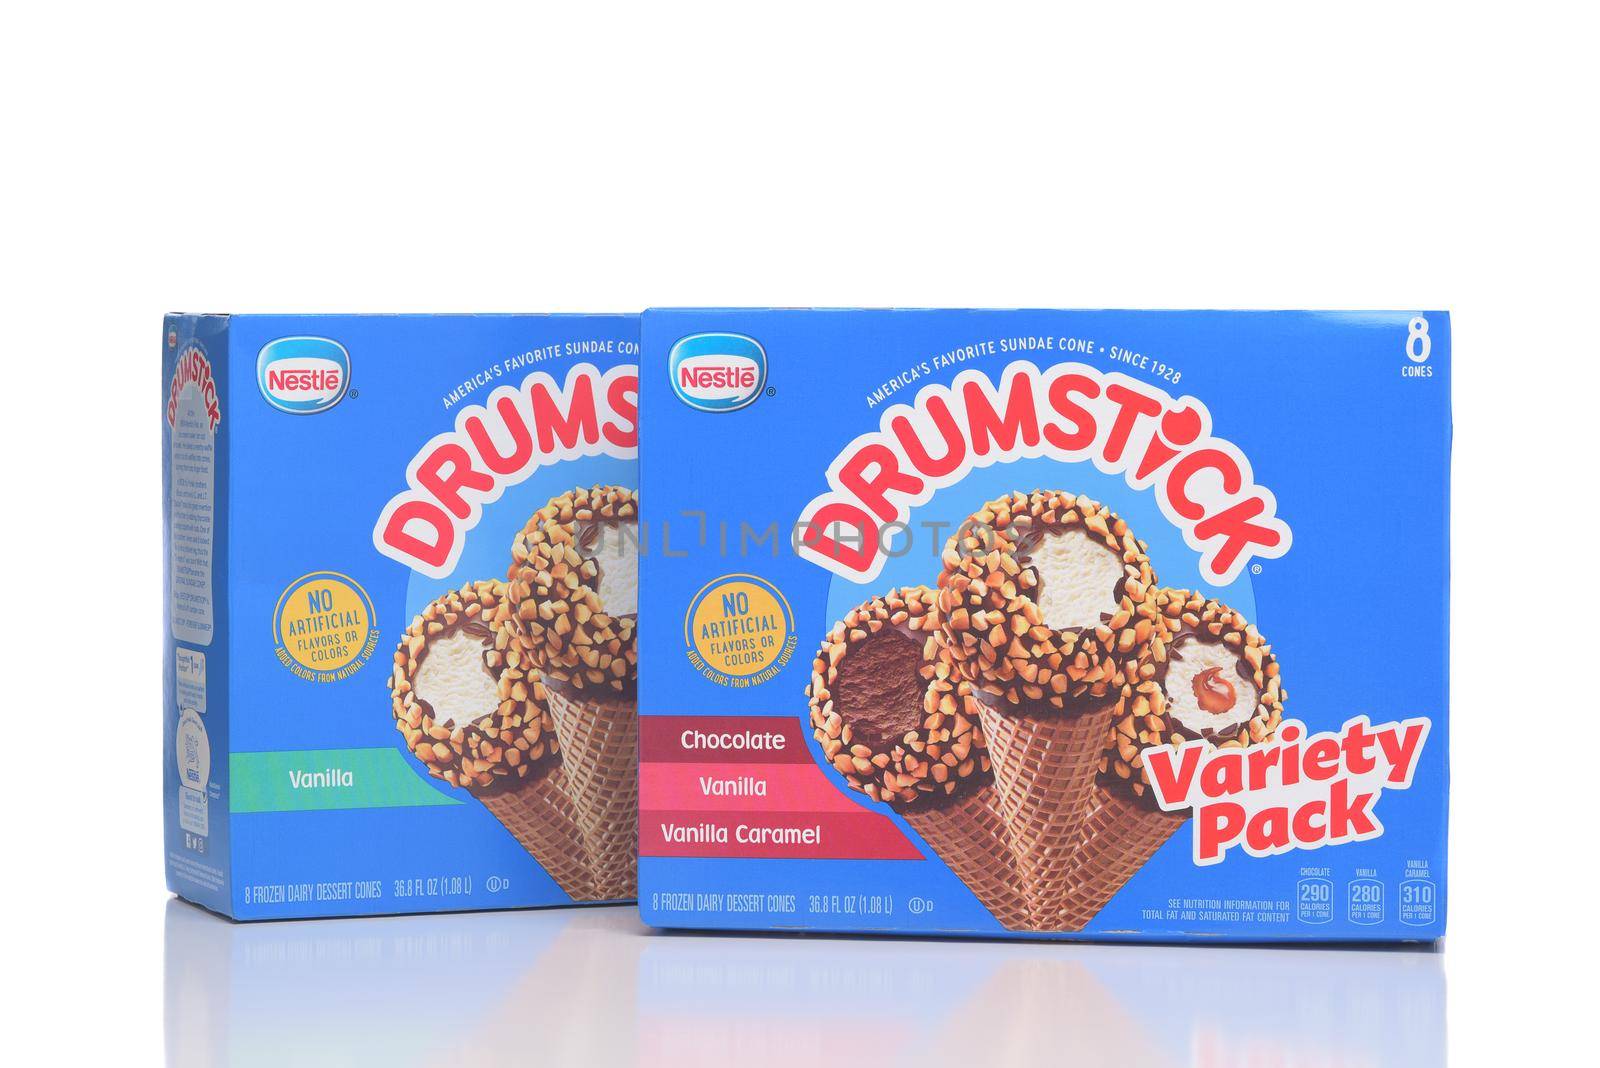 IRVINE, CALIFORNIA - 28 MAY 2021: Two 8 pack boxes of Nestle Drumstick Ice Cream treats, Original Vanilla and Variety Pack.